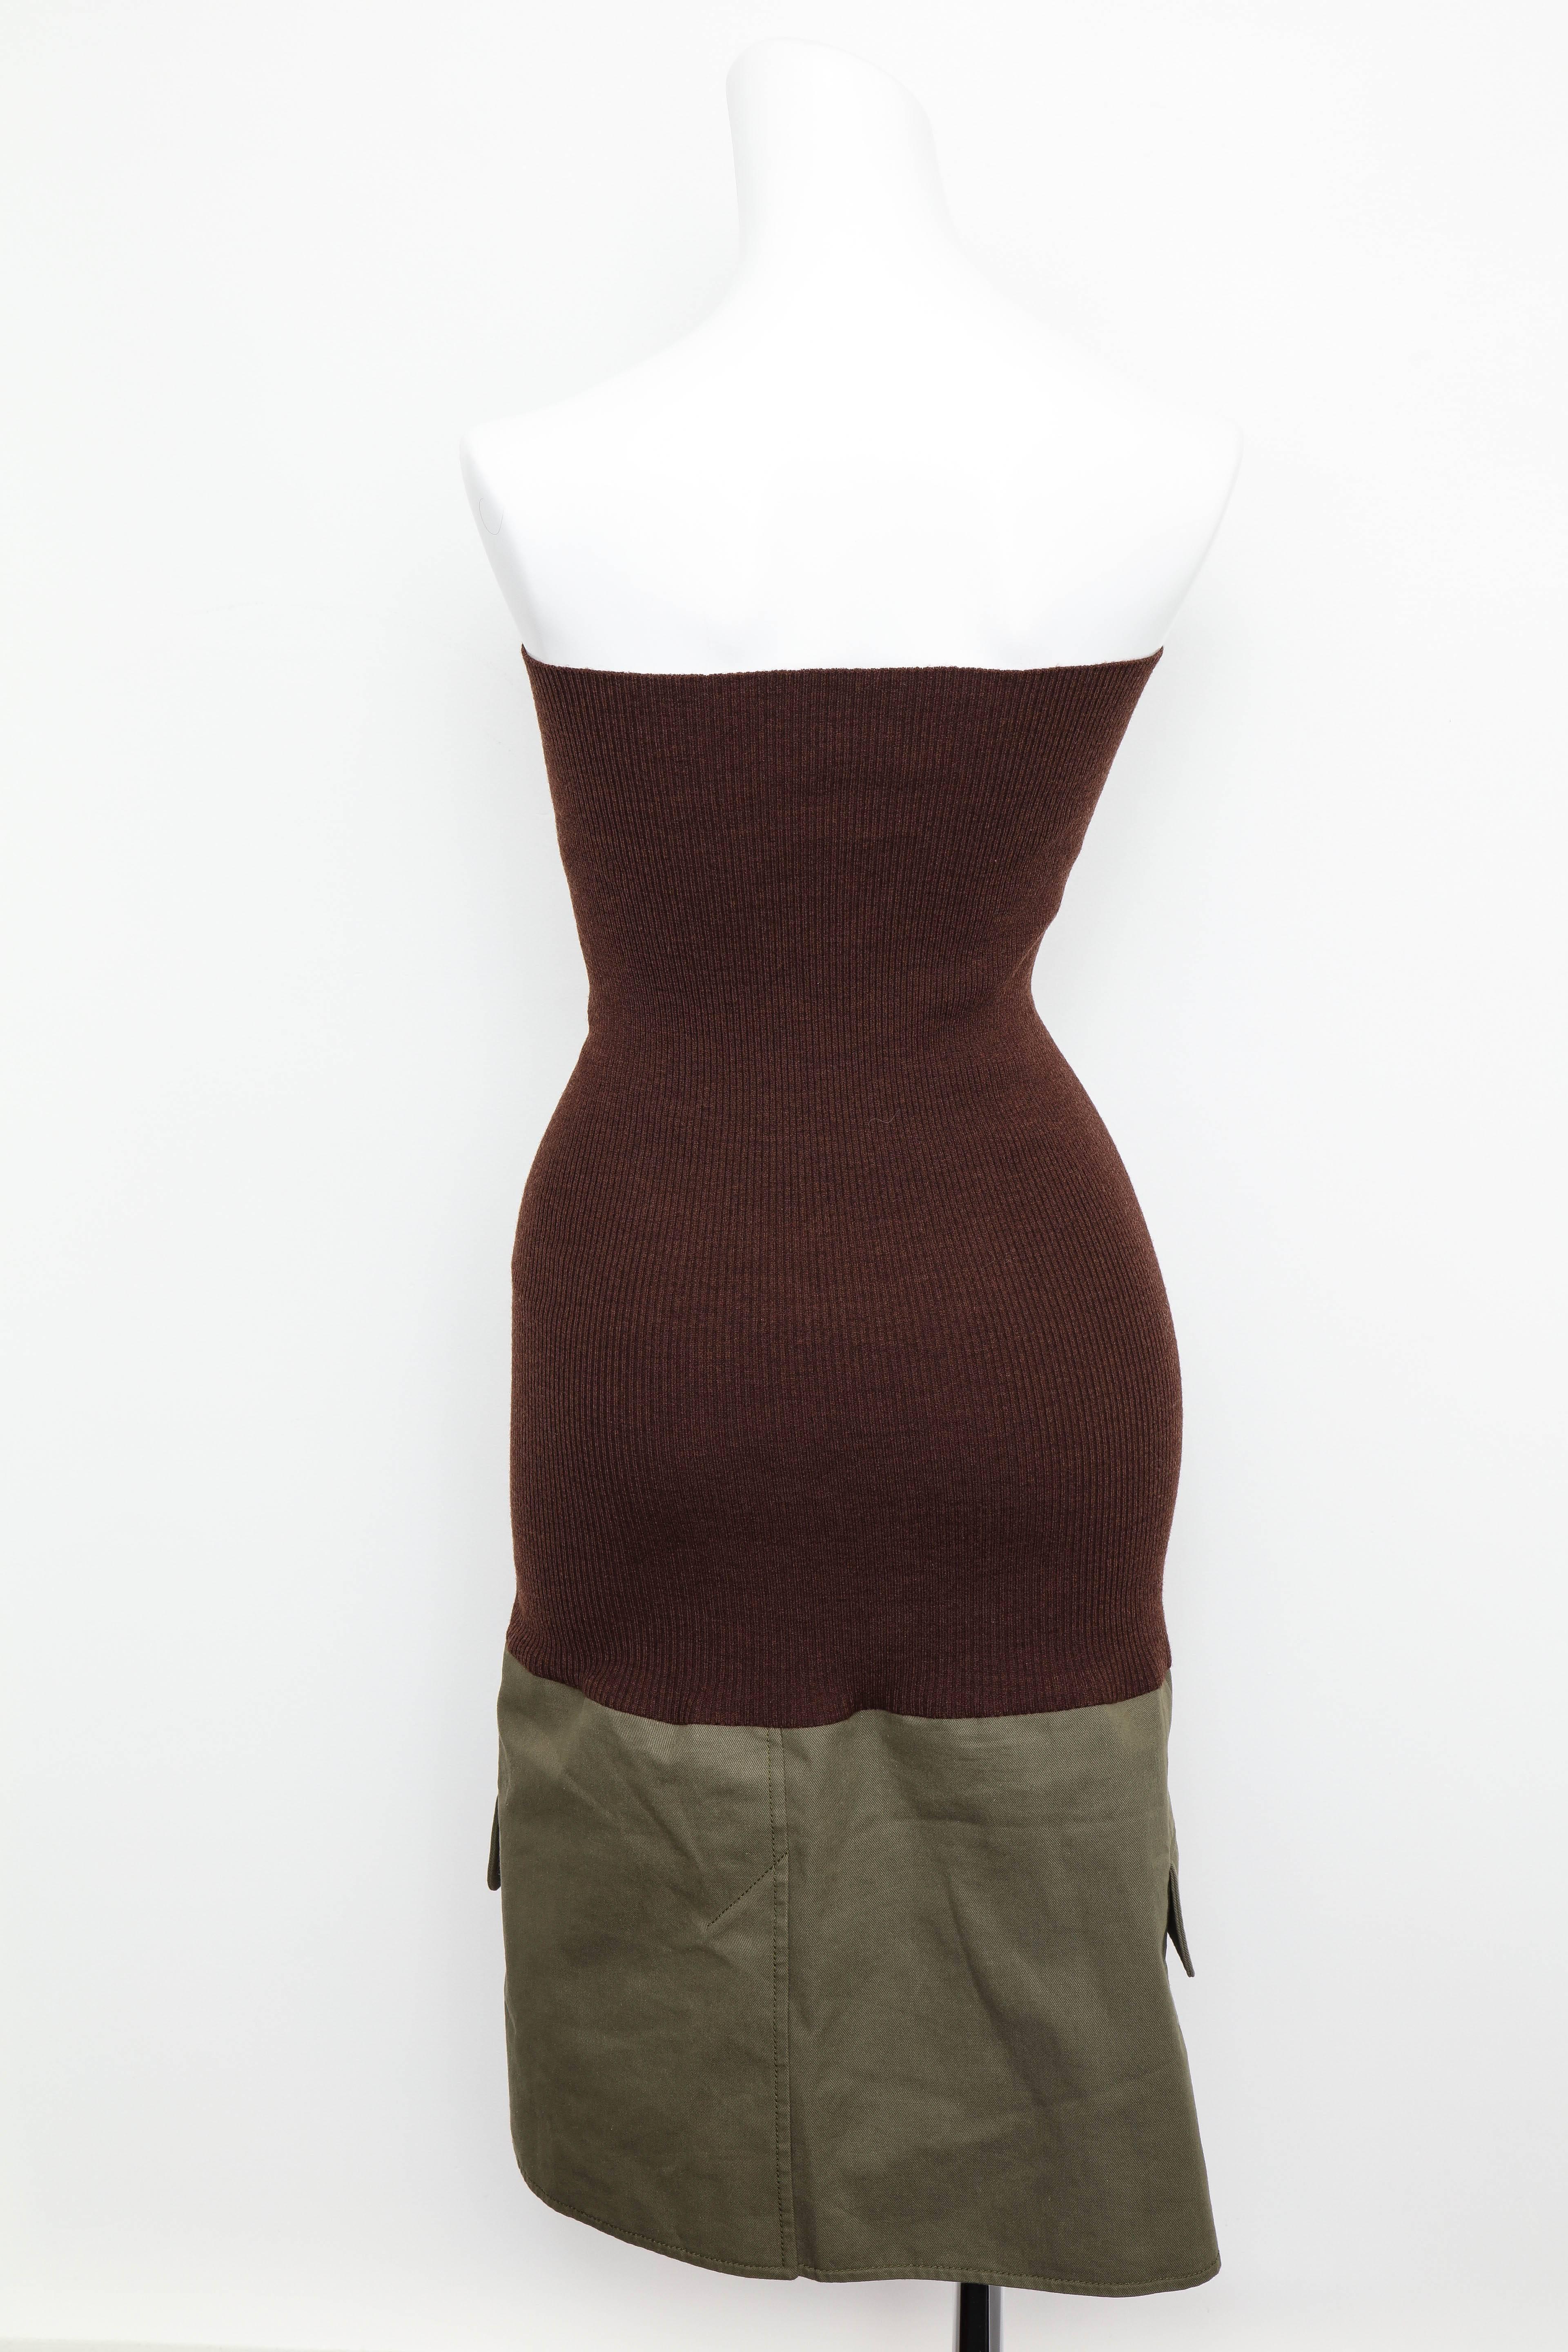 Christian Dior by John Galliano Knit Tube Dress In Excellent Condition For Sale In Chicago, IL